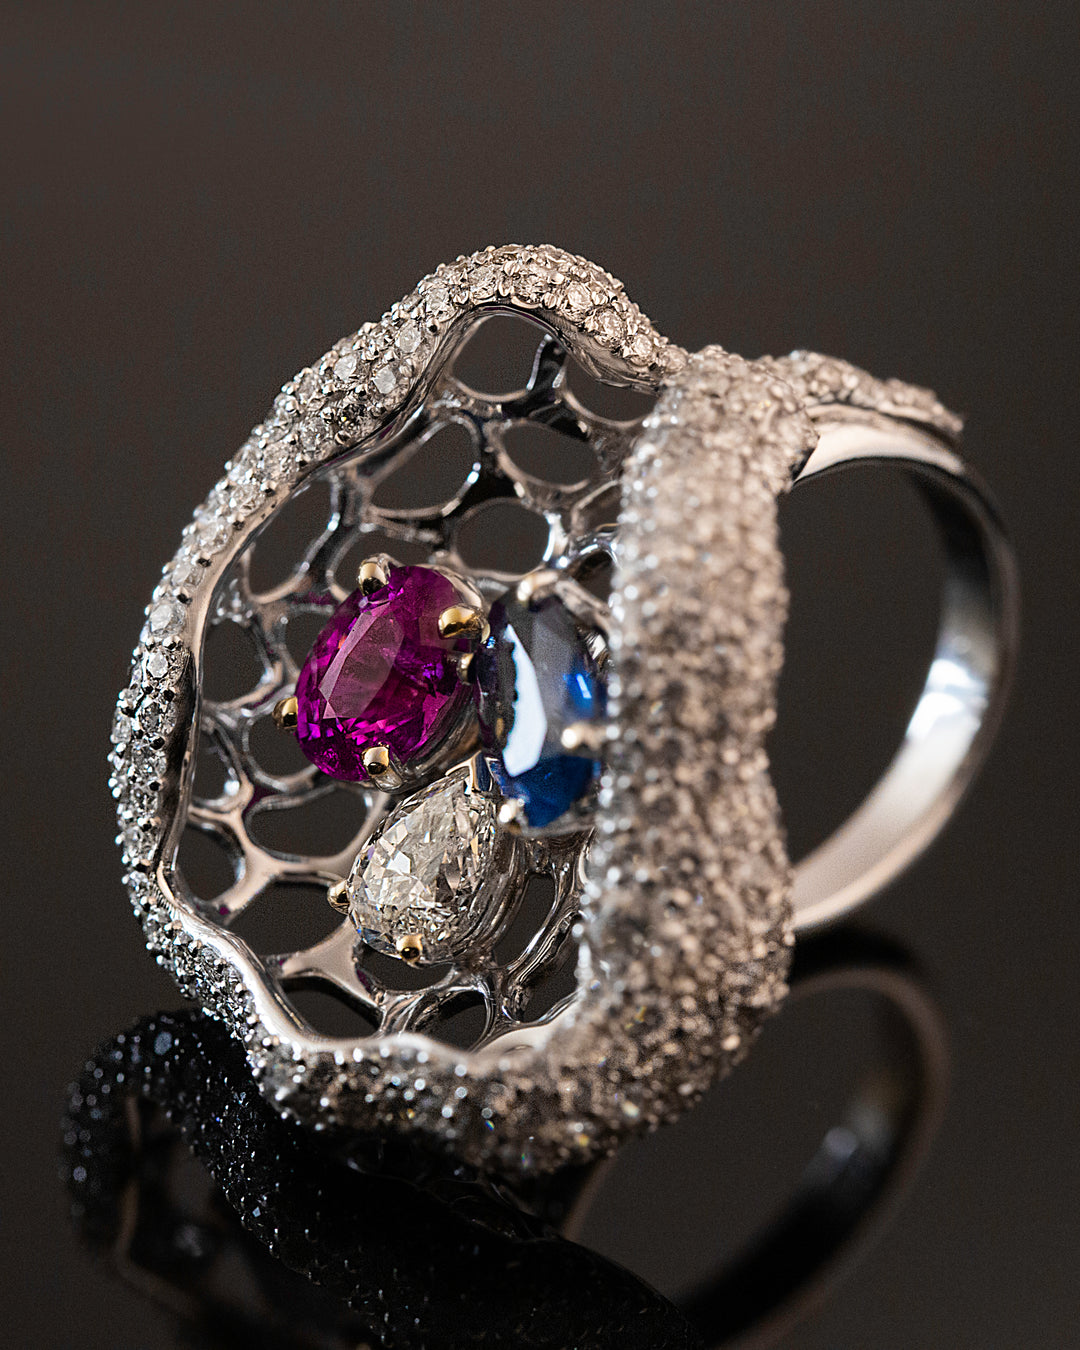 Fancy Sapphire and Diamond Cocktail Ring with Blue Sapphire,Pink Sapphire in 14K White Gold